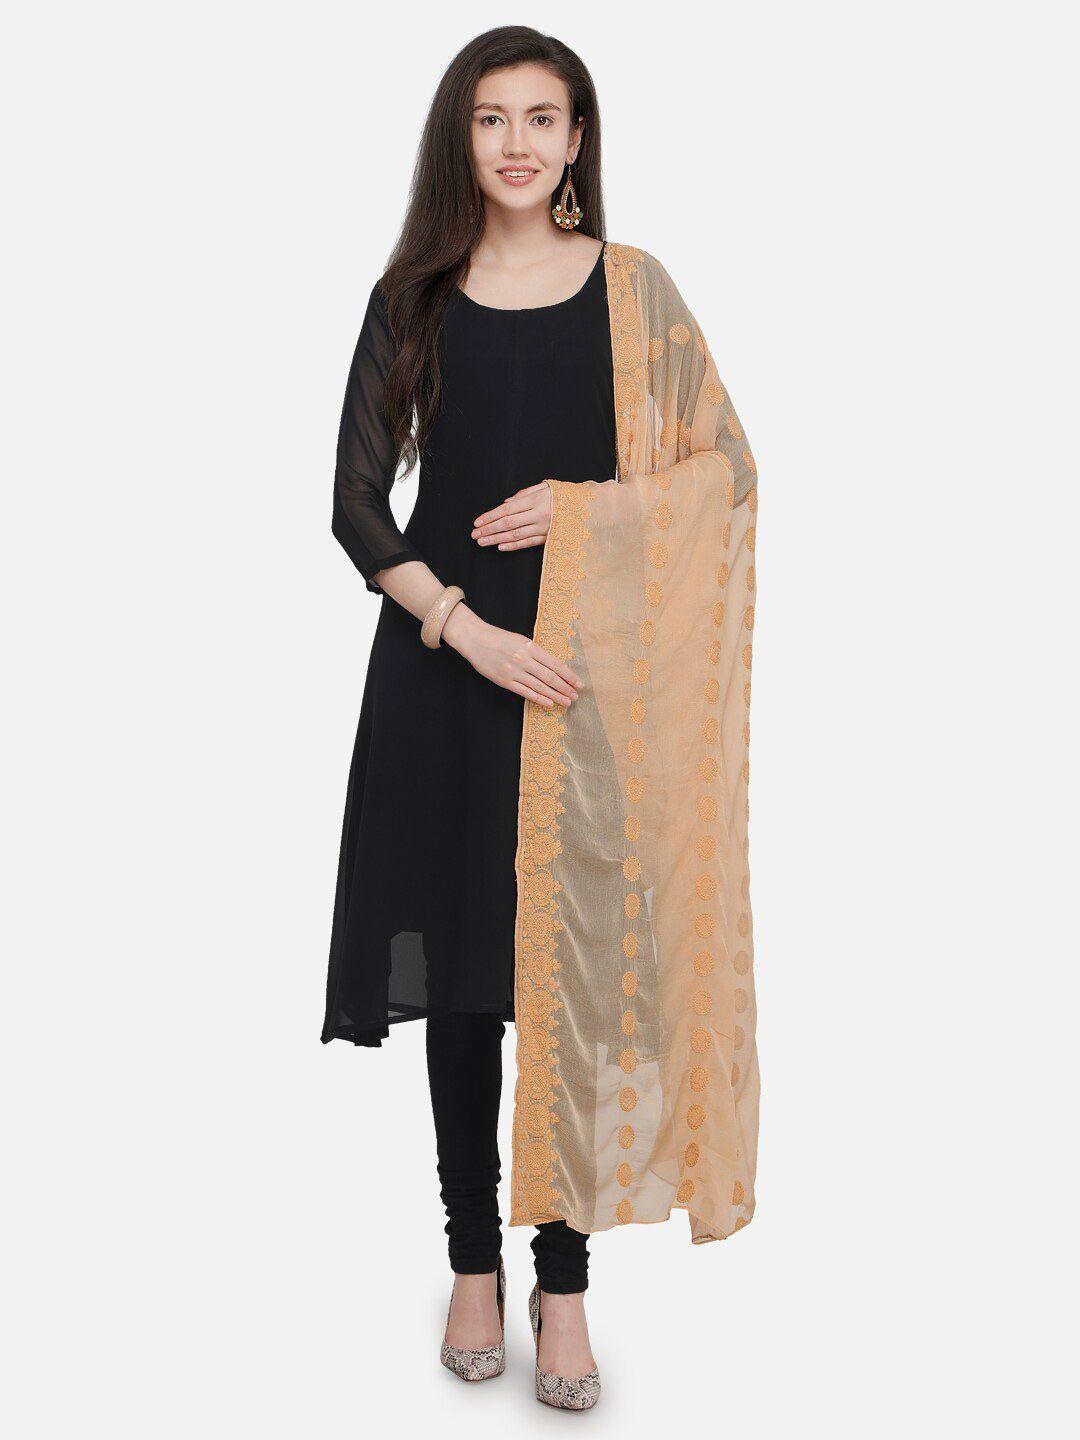 mf embroidered dupatta with thread work